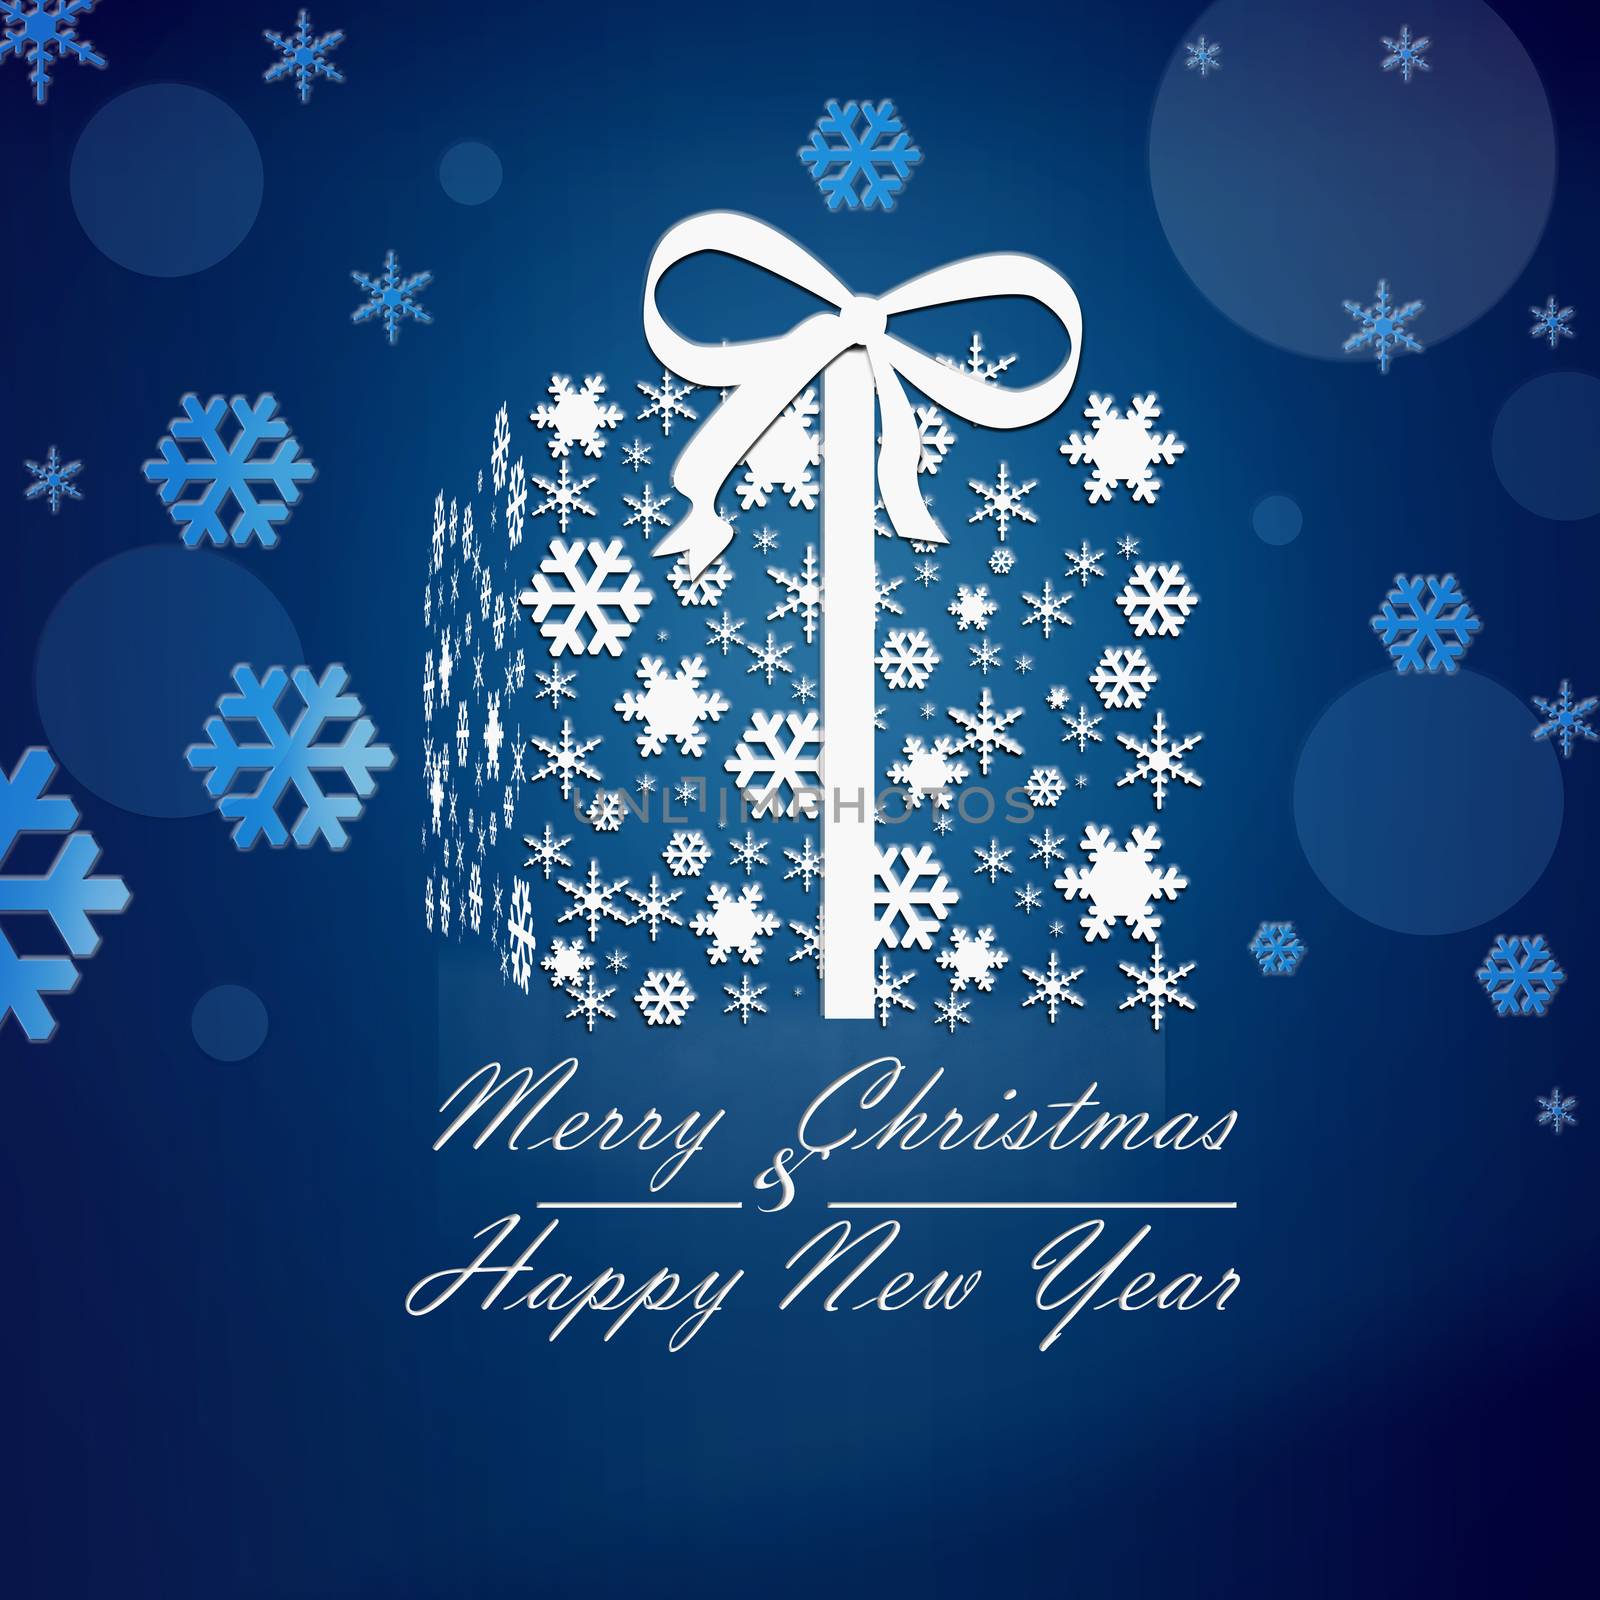 Christmas background for greeting card. White ornament with decoration of snowflakes in shape of gift box on dark blue background. Calligraphy Merry Christmas and Happy New Year. 3D illustration